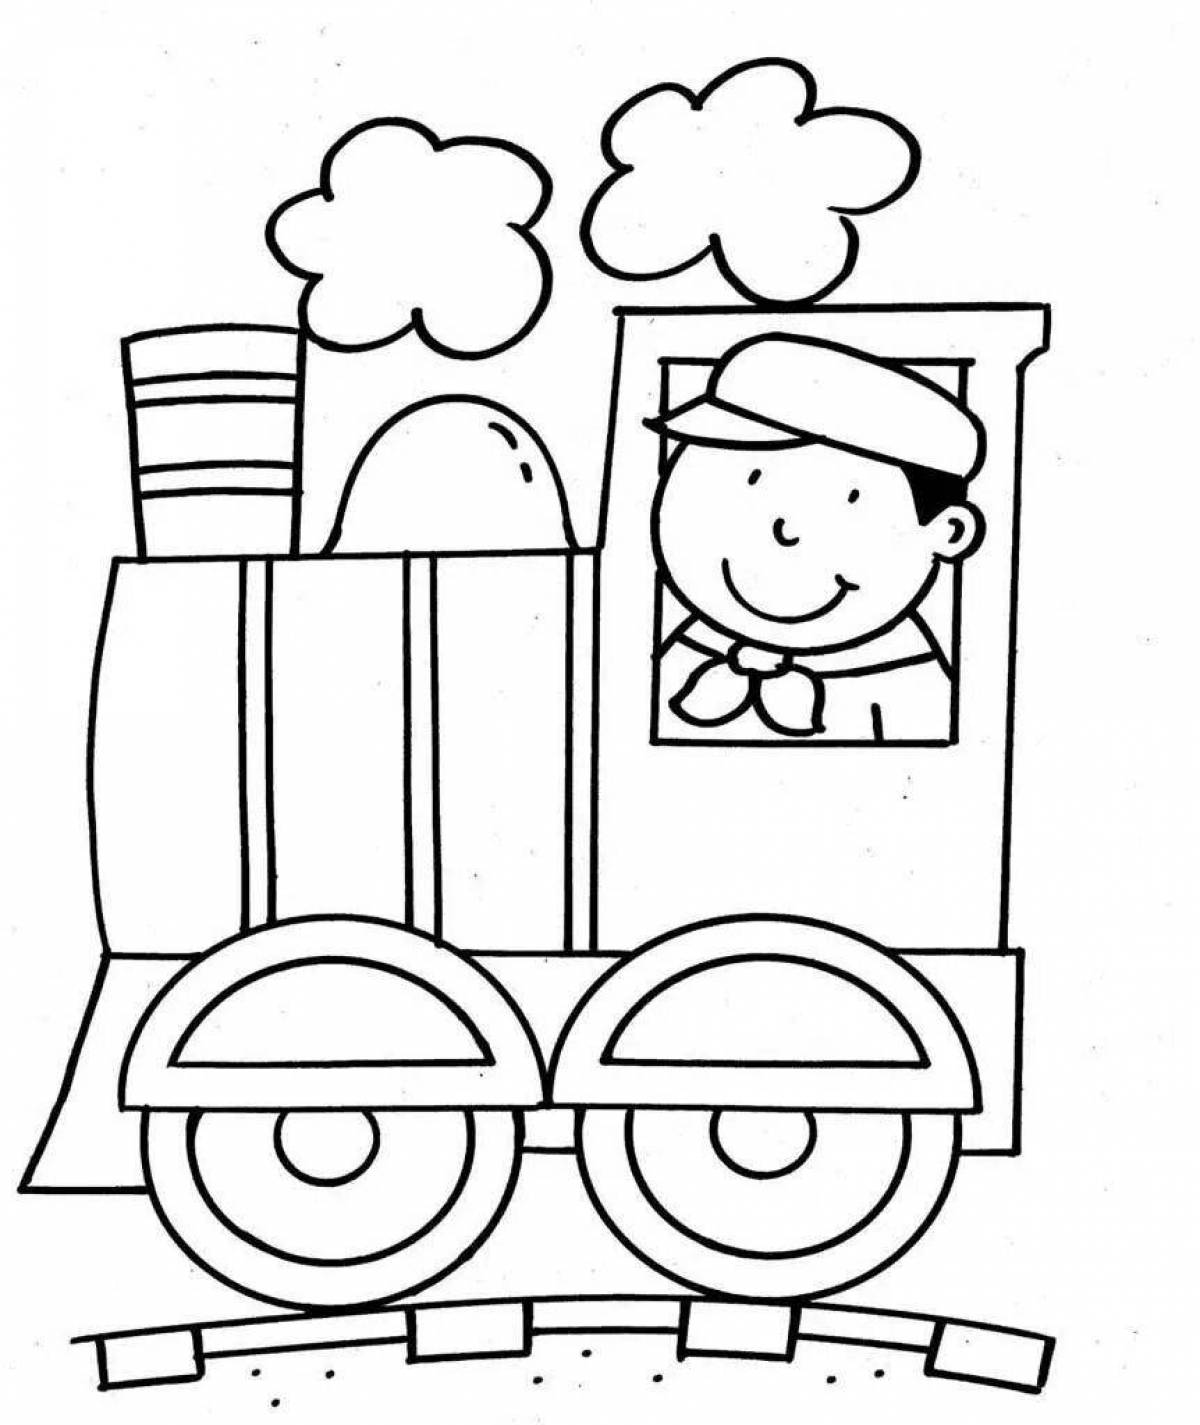 Bicycle mechanic coloring page